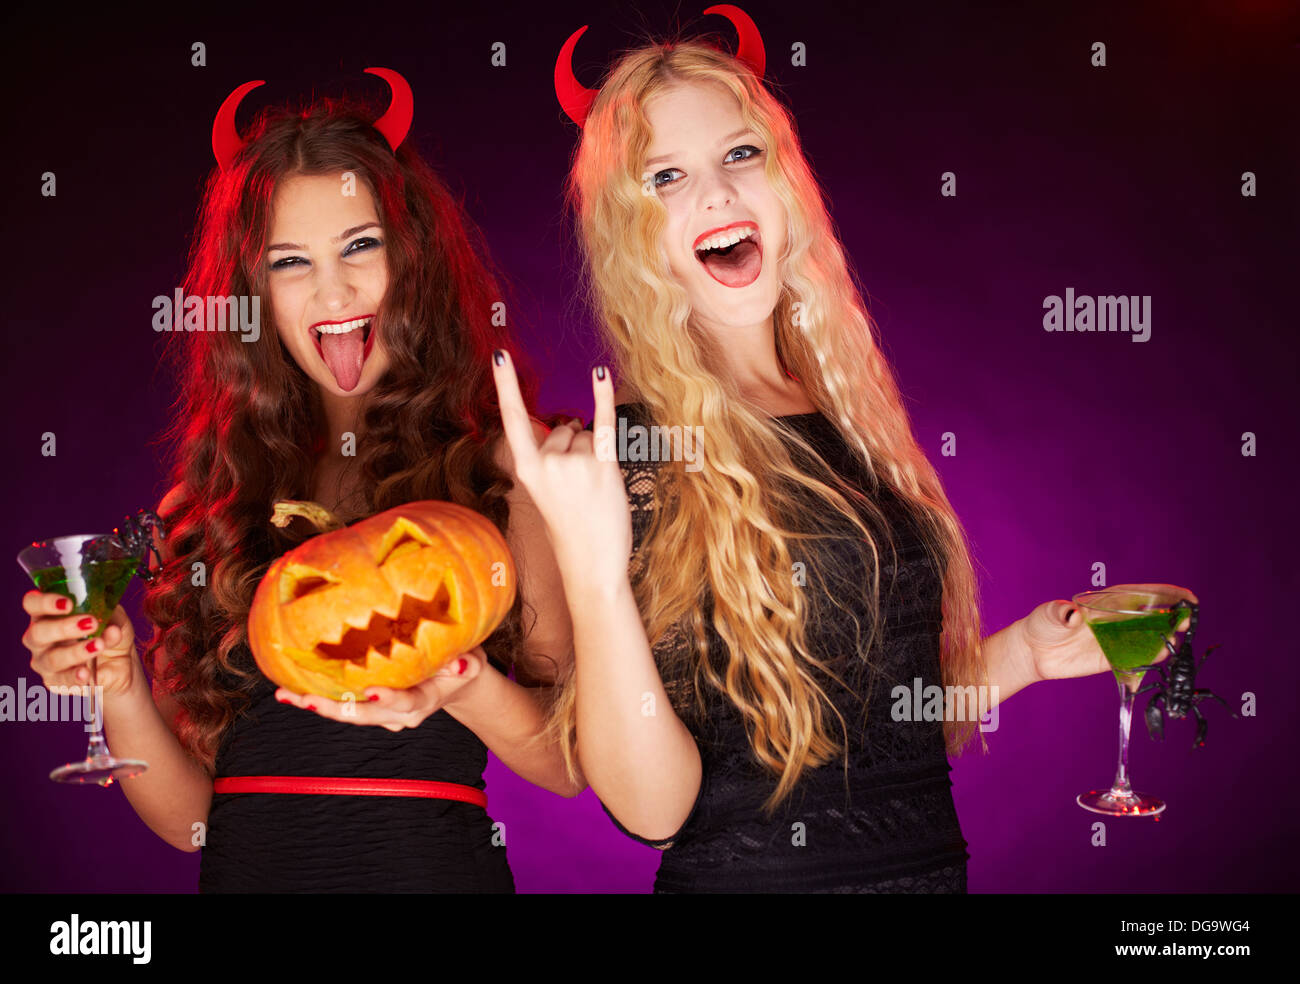 Photo of two young females with Halloween pumpkin and cocktails with scorpions having fun Stock Photo